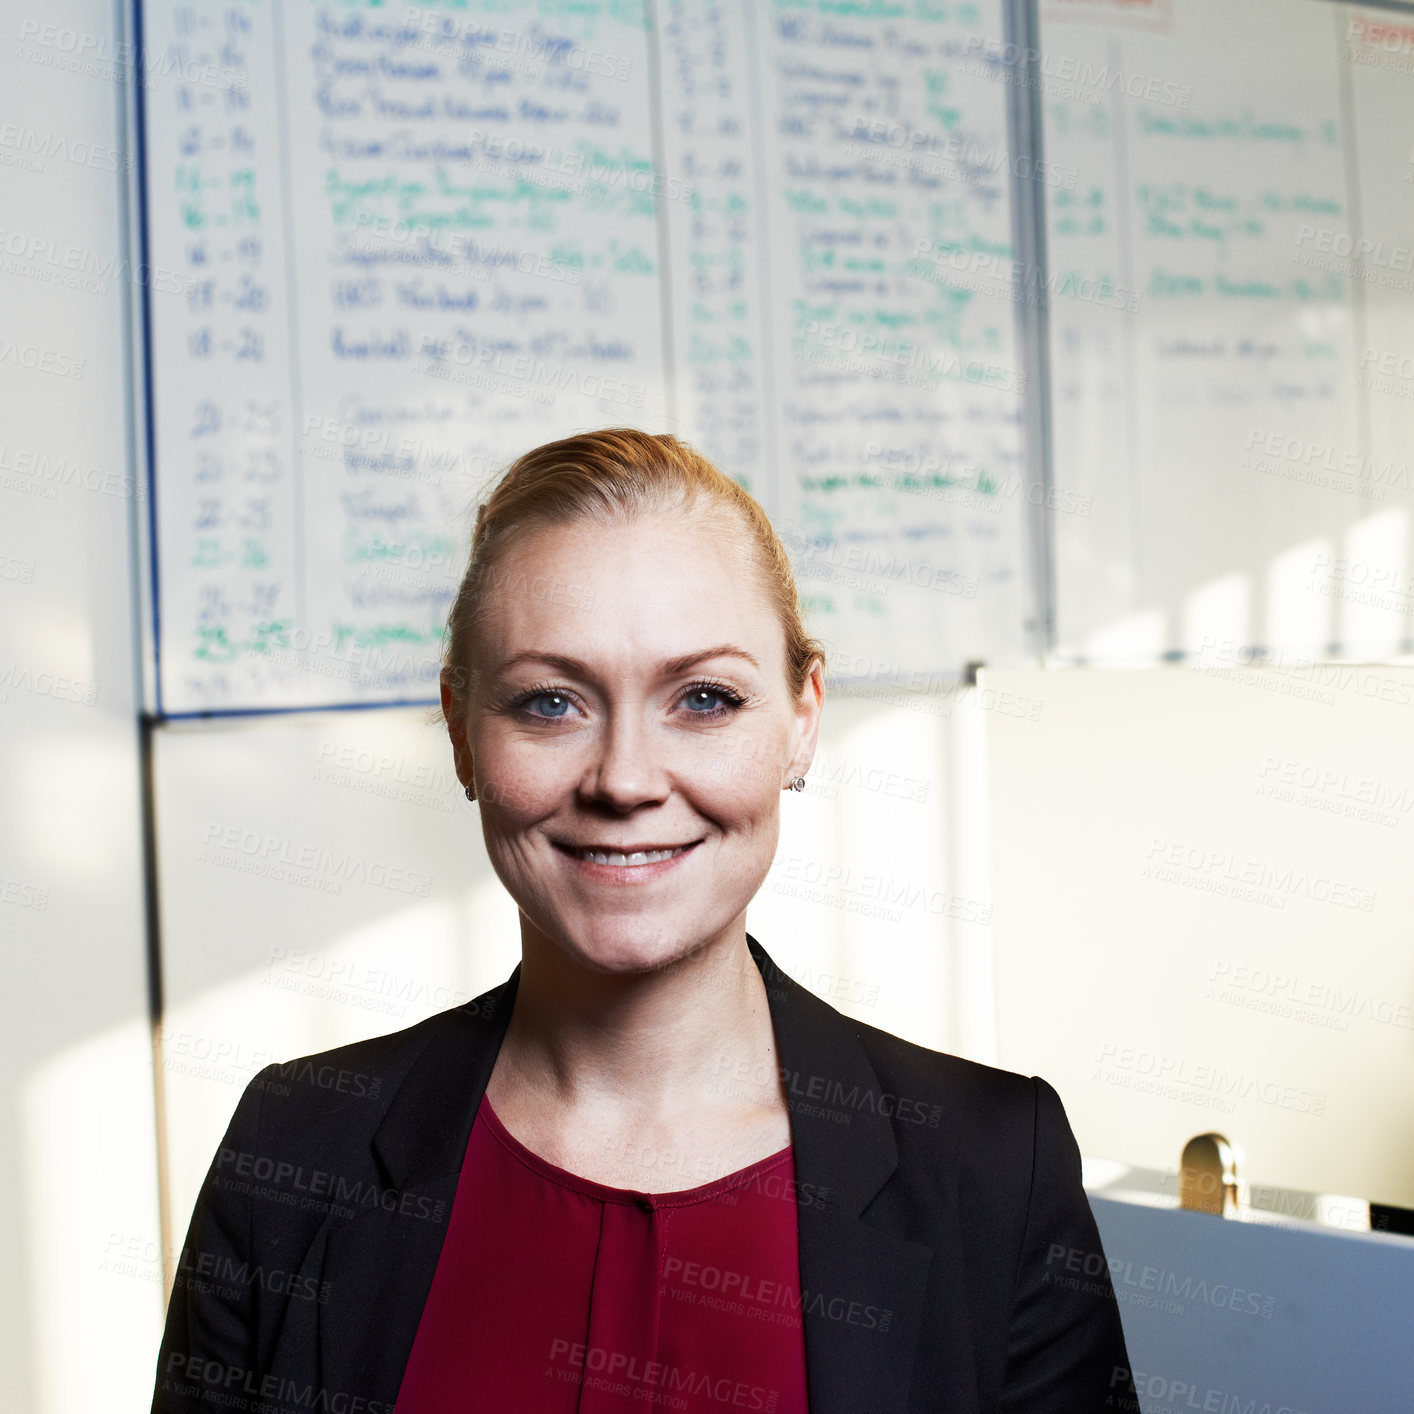 Buy stock photo Portrait of an attractive businesswoman standing in the office